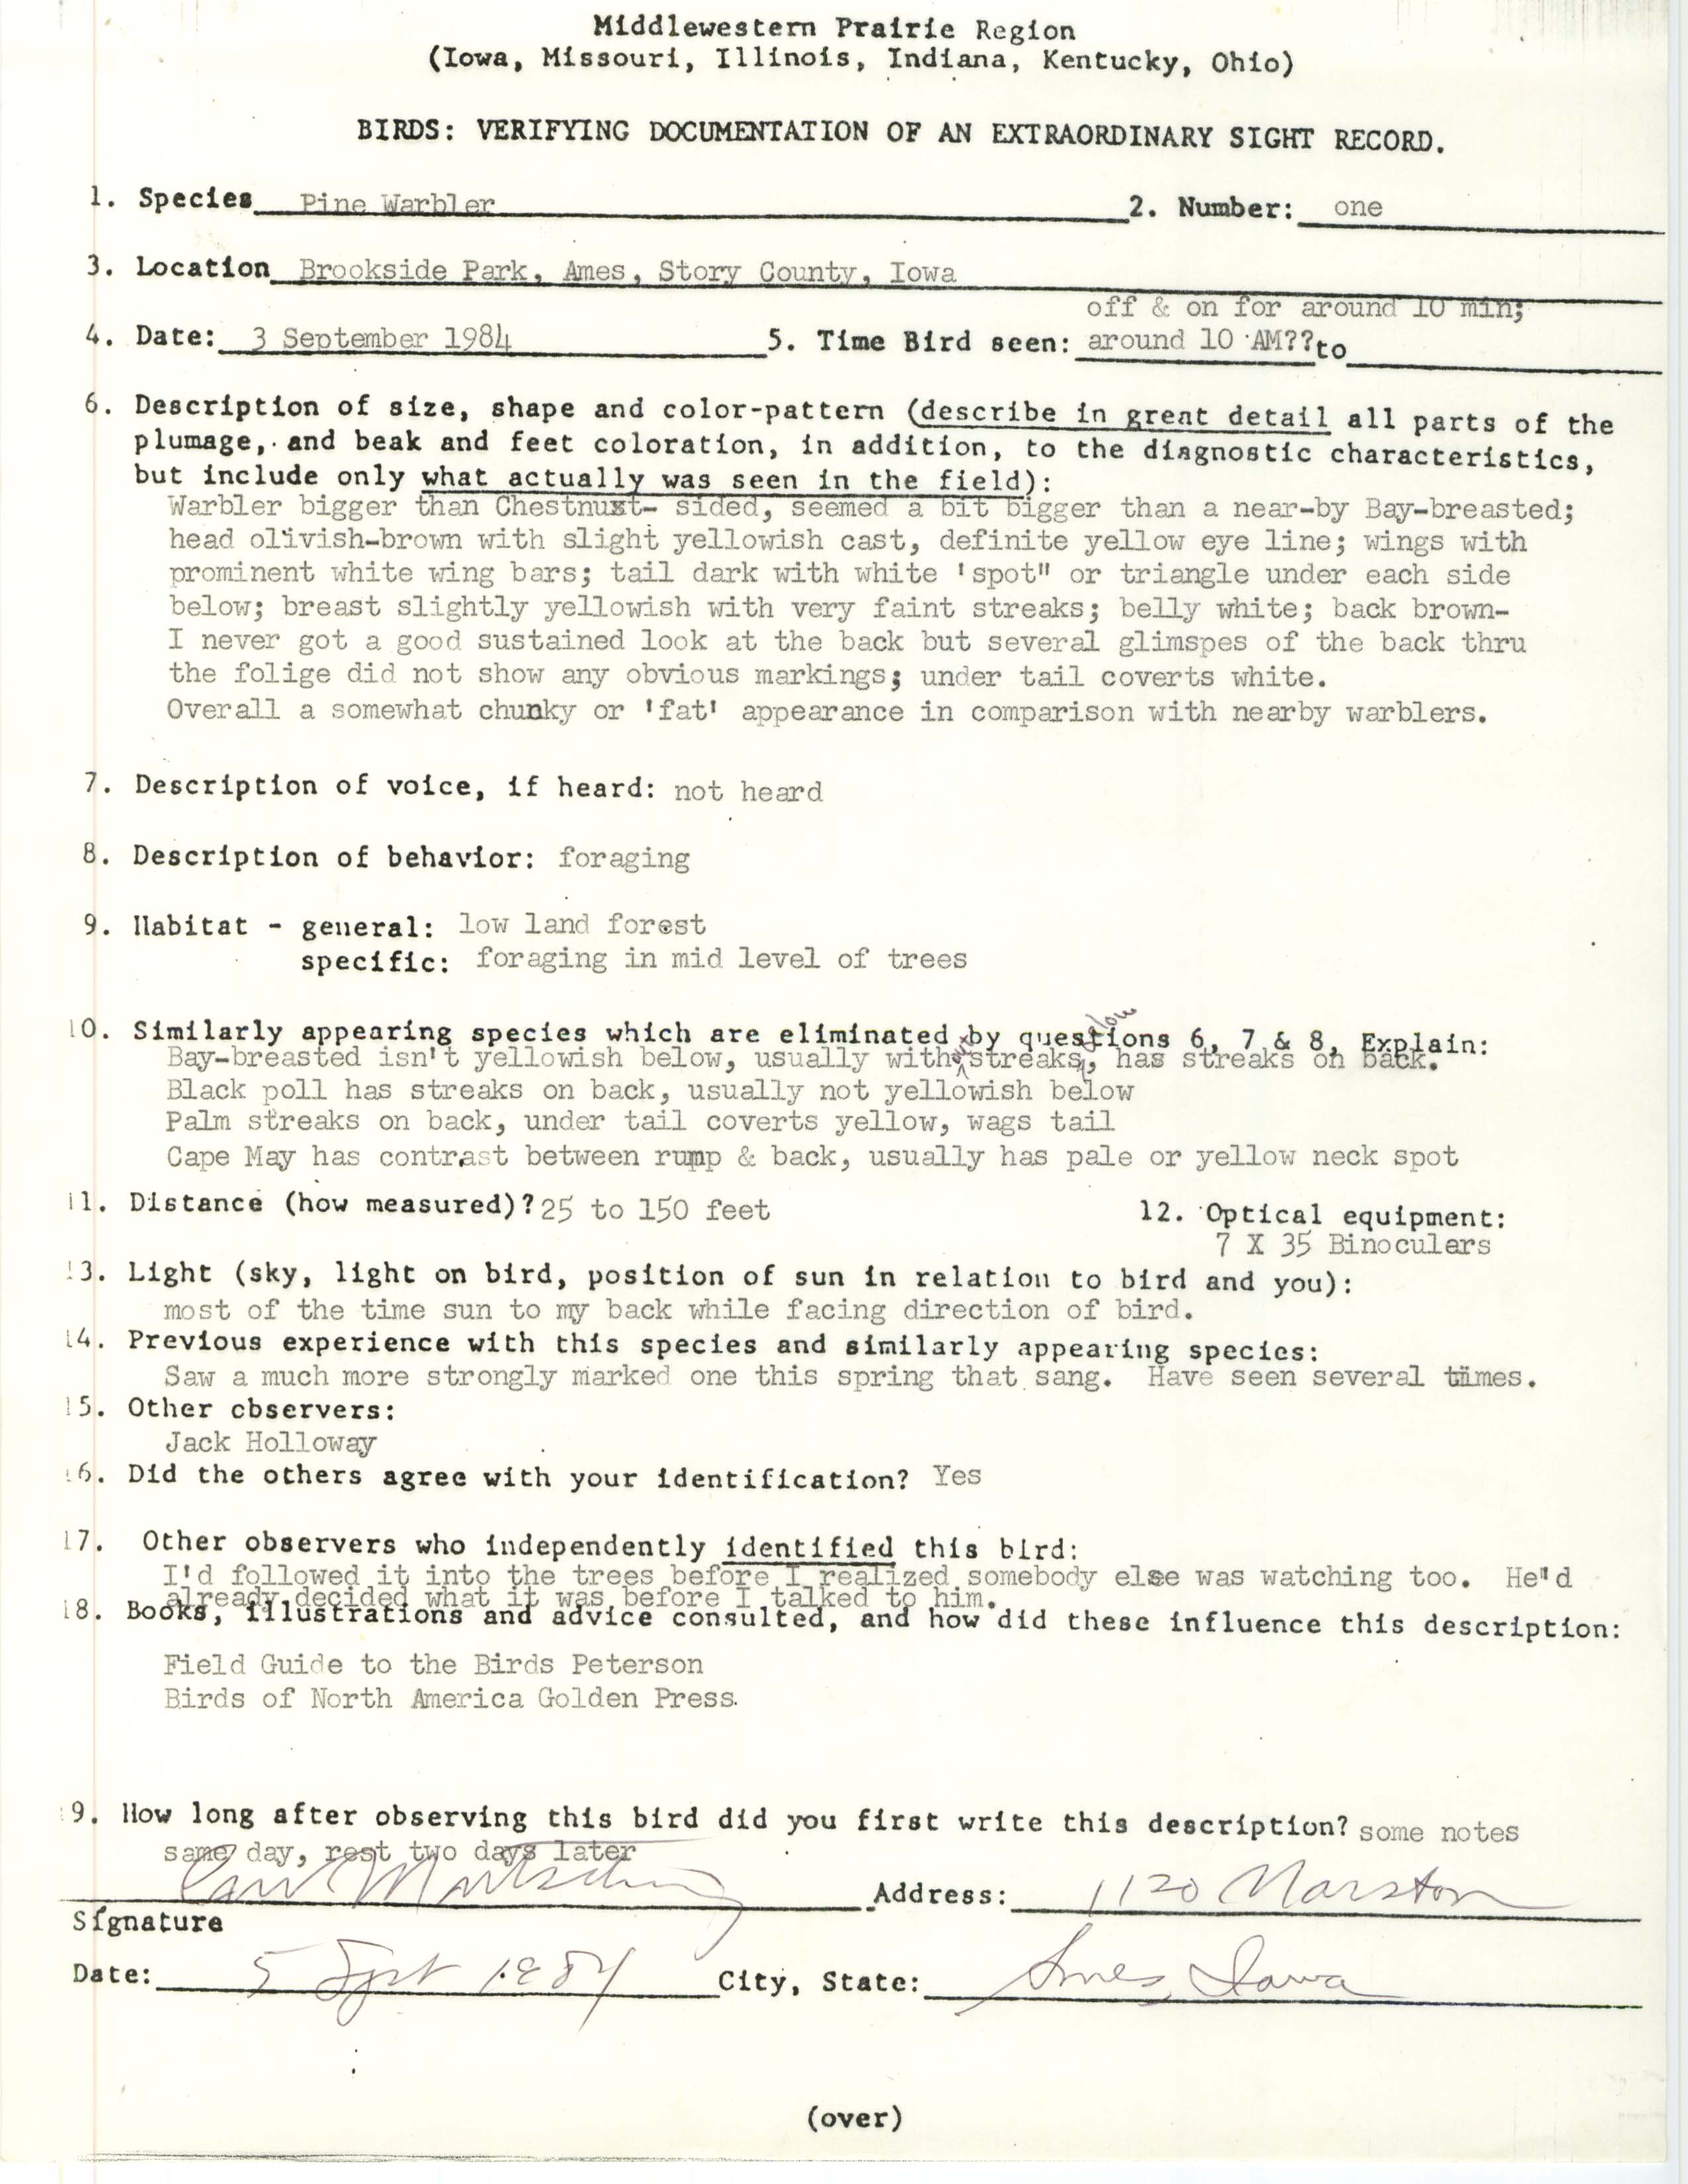 Rare bird documentation form for Pine Warbler at Brookside Park in Ames in 1984